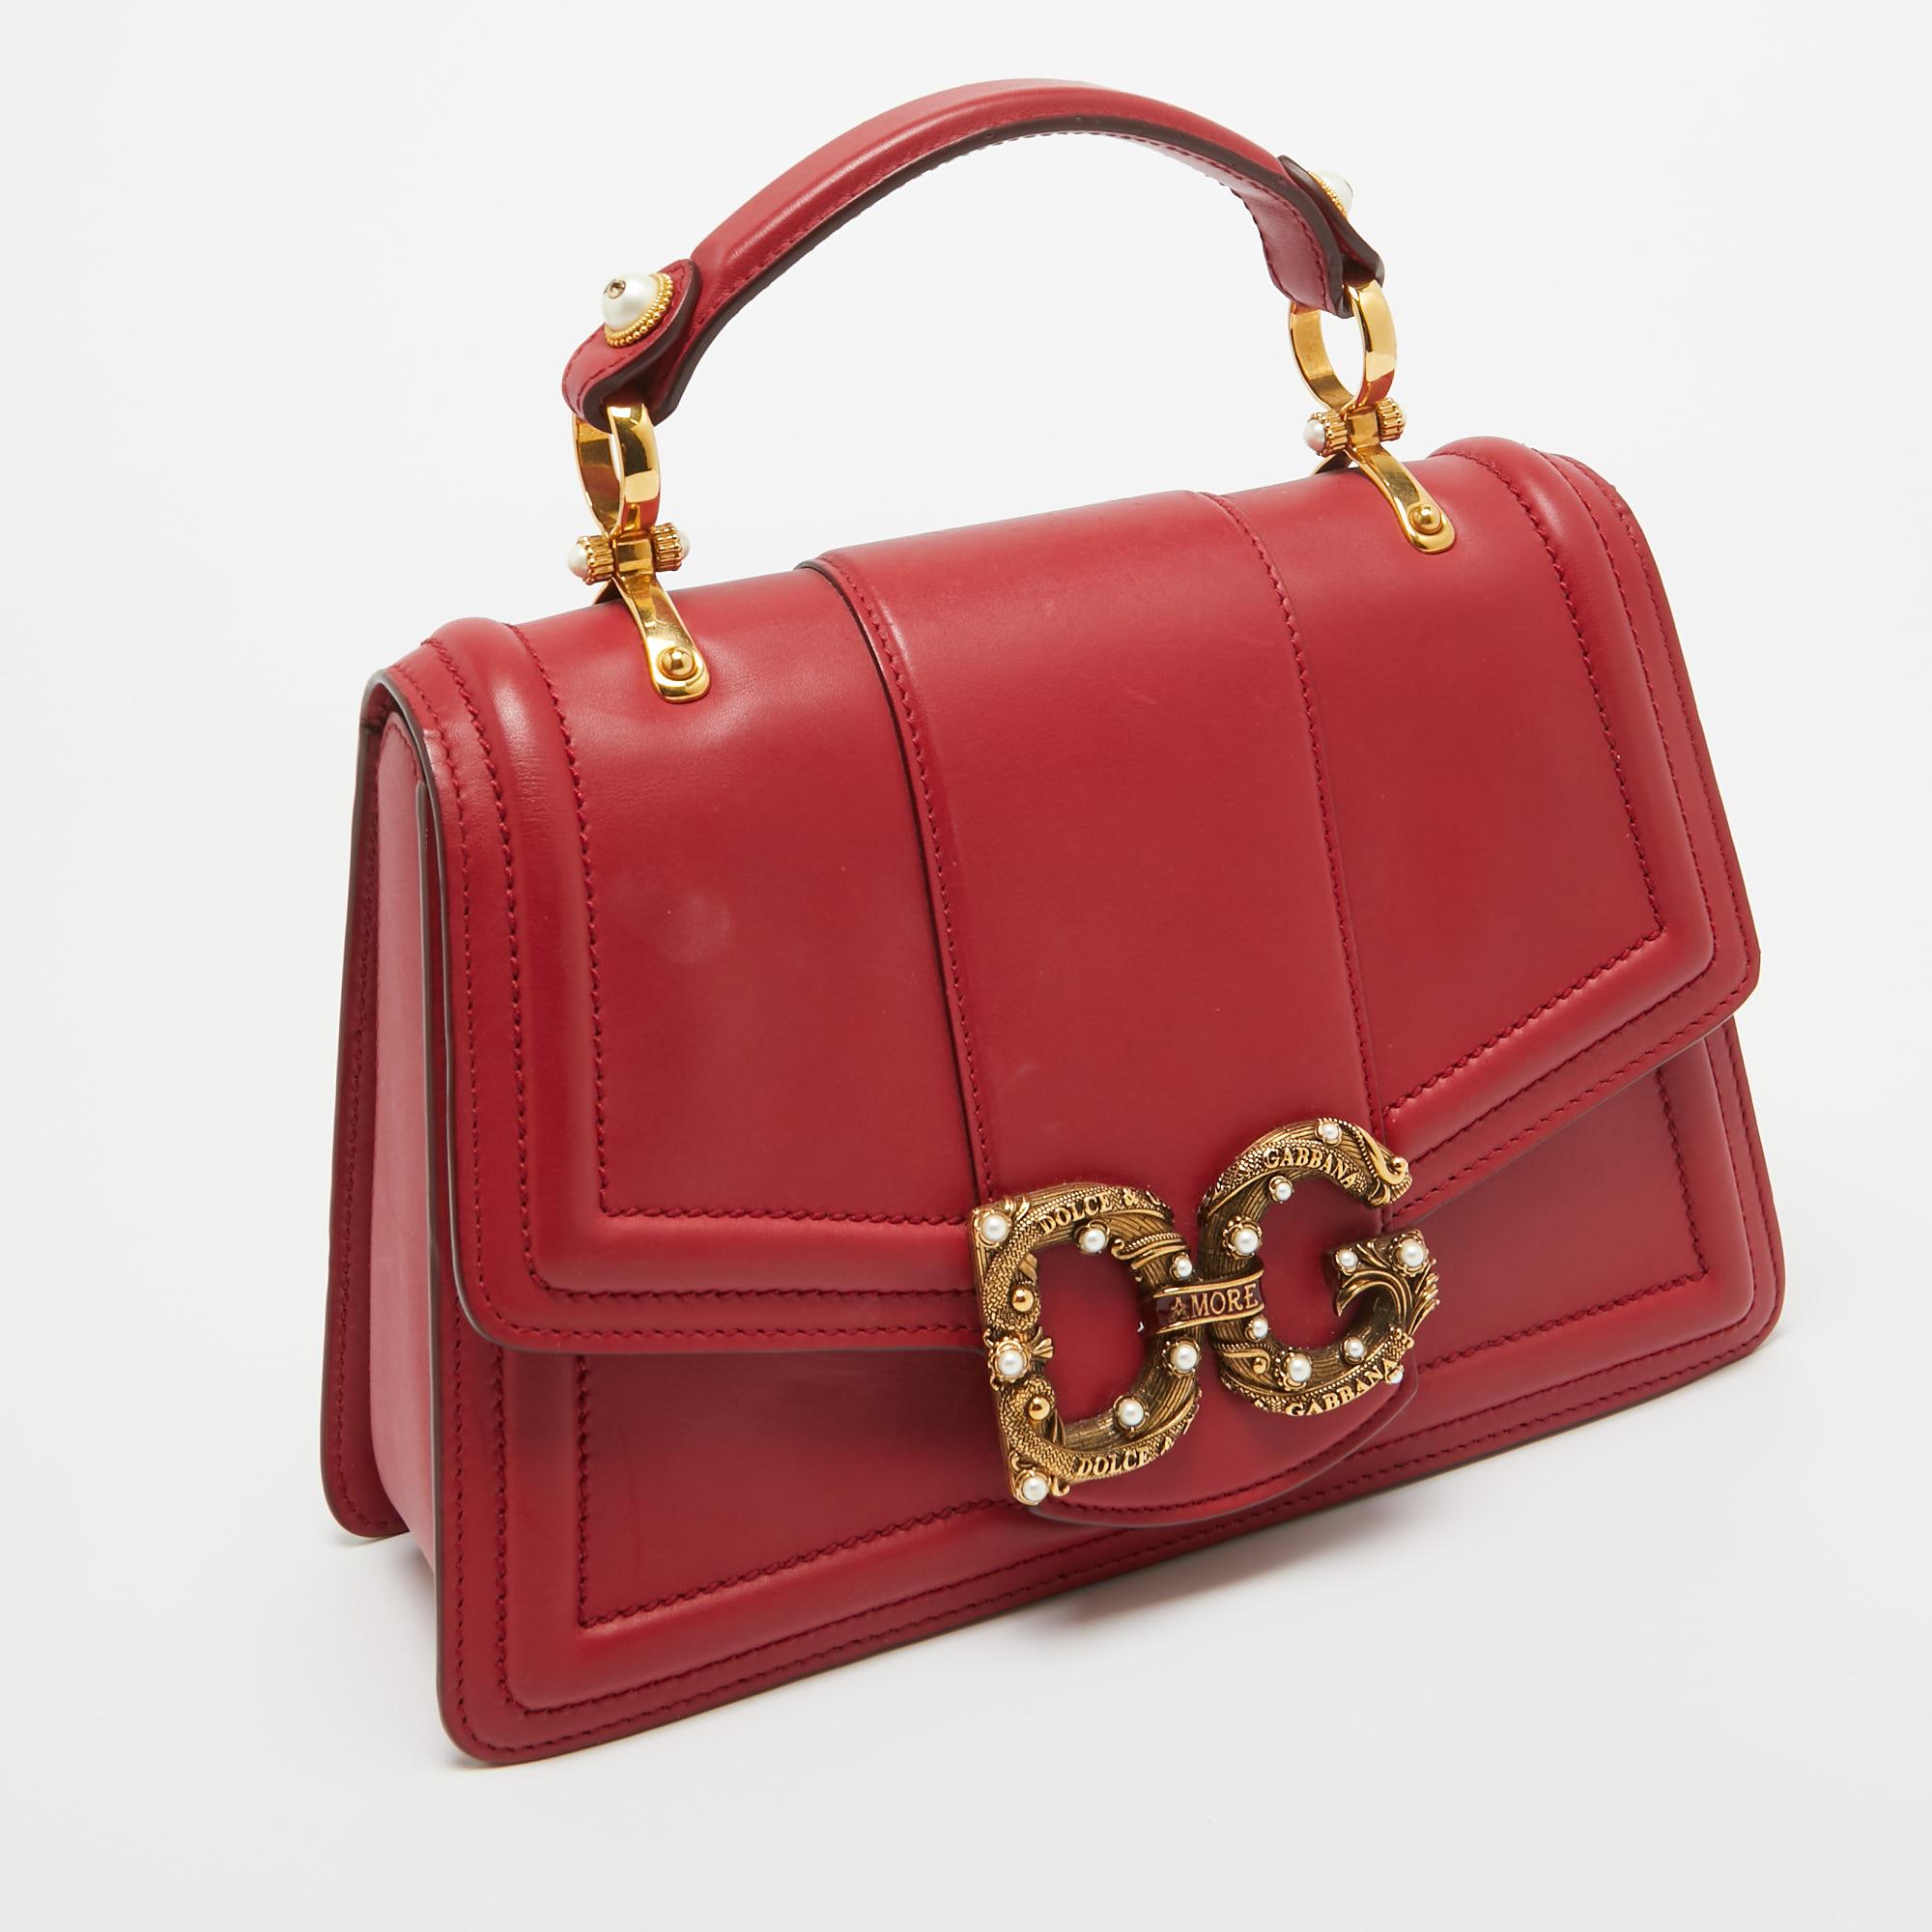 Dolce & Gabbana Red Leather DG Amore Top Handle Bag In Good Condition For Sale In Dubai, Al Qouz 2